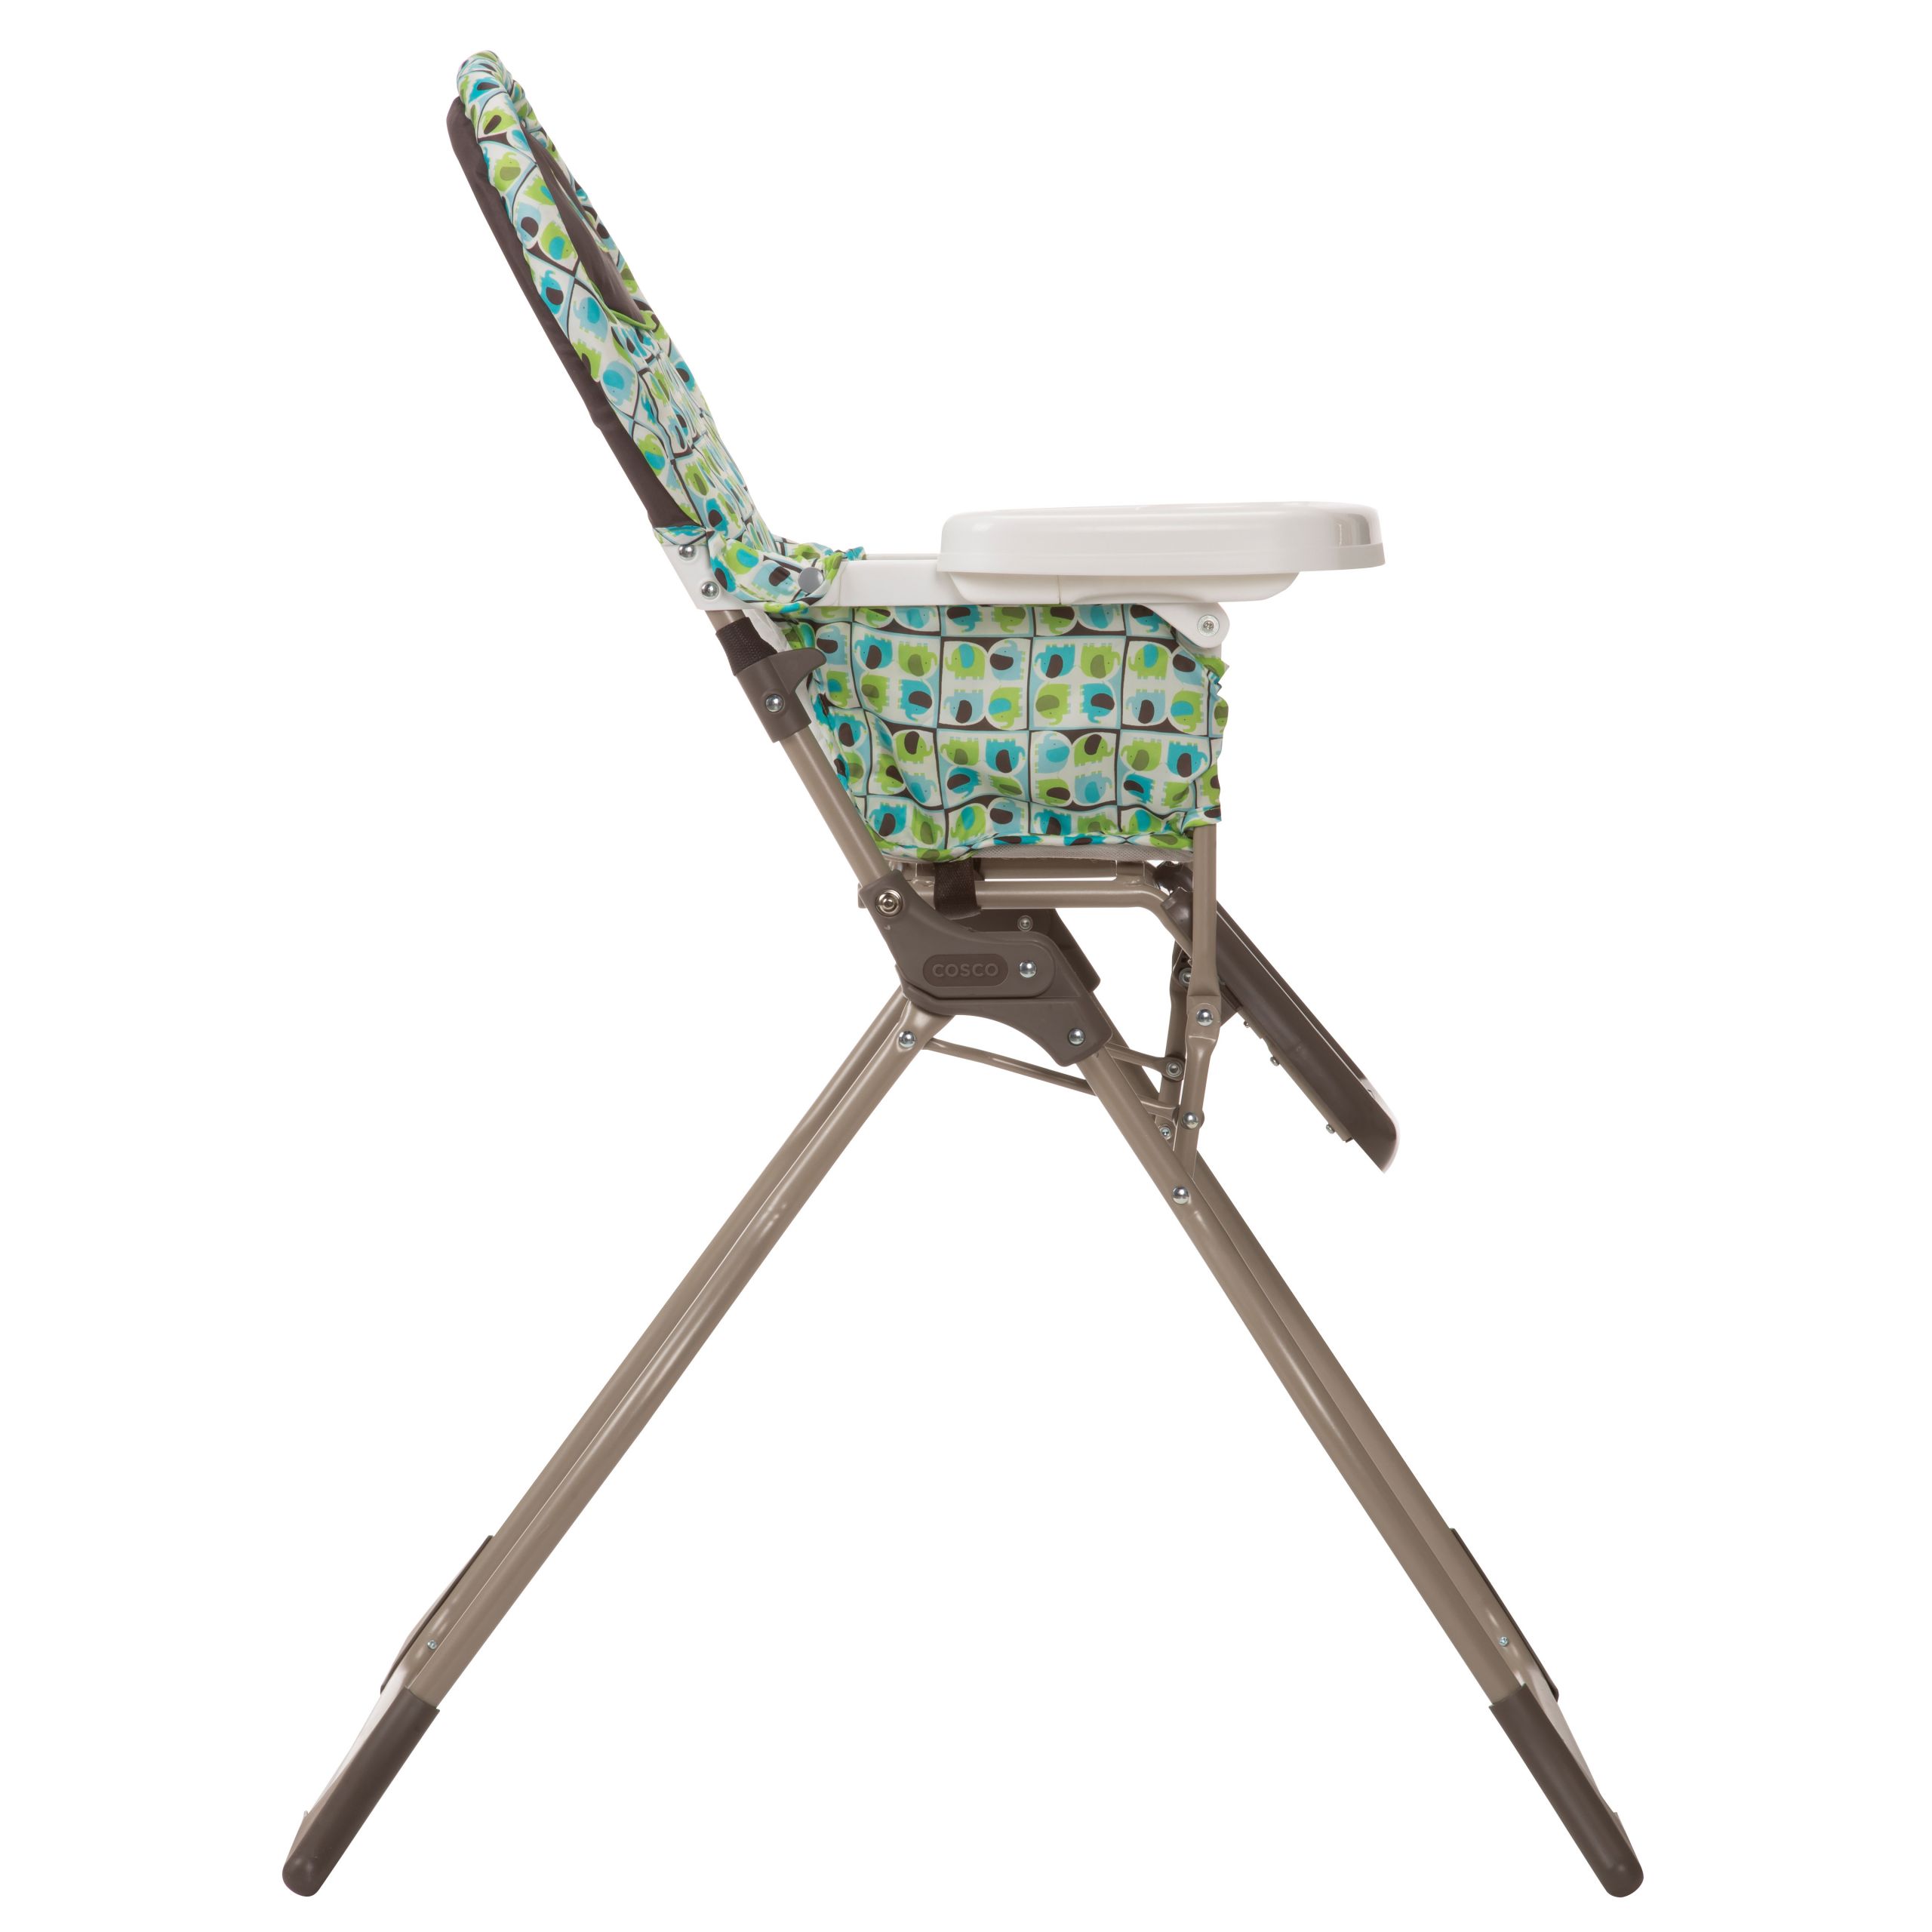 Costco Kids Chair
 Furniture Excellent Costco High Chair Graco Leopard Style